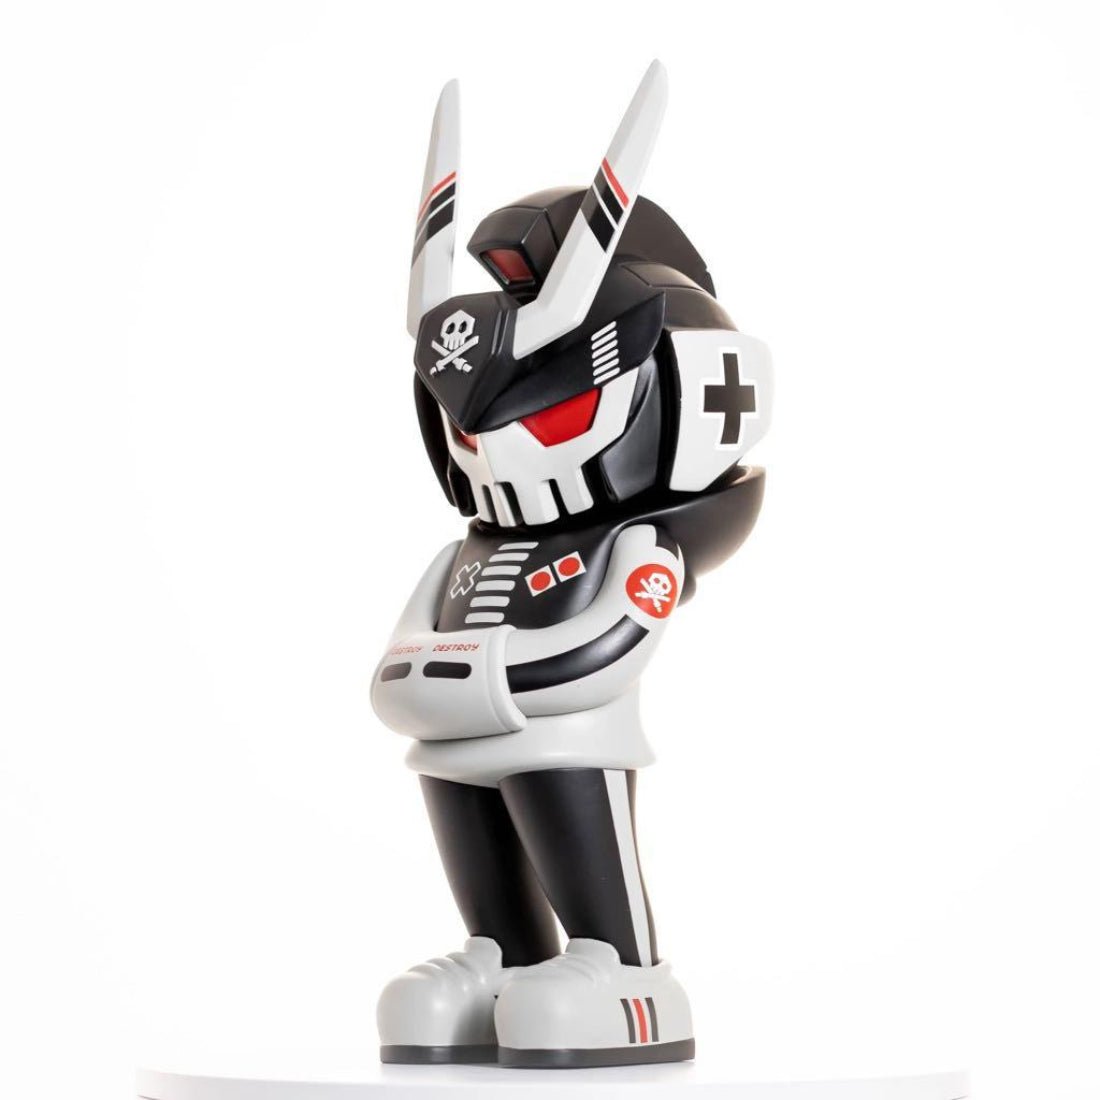 (Pre-Owned) Megateq By Quiccs X Martian Toys - Retro Destroyer - مجسم - Store 974 | ستور ٩٧٤